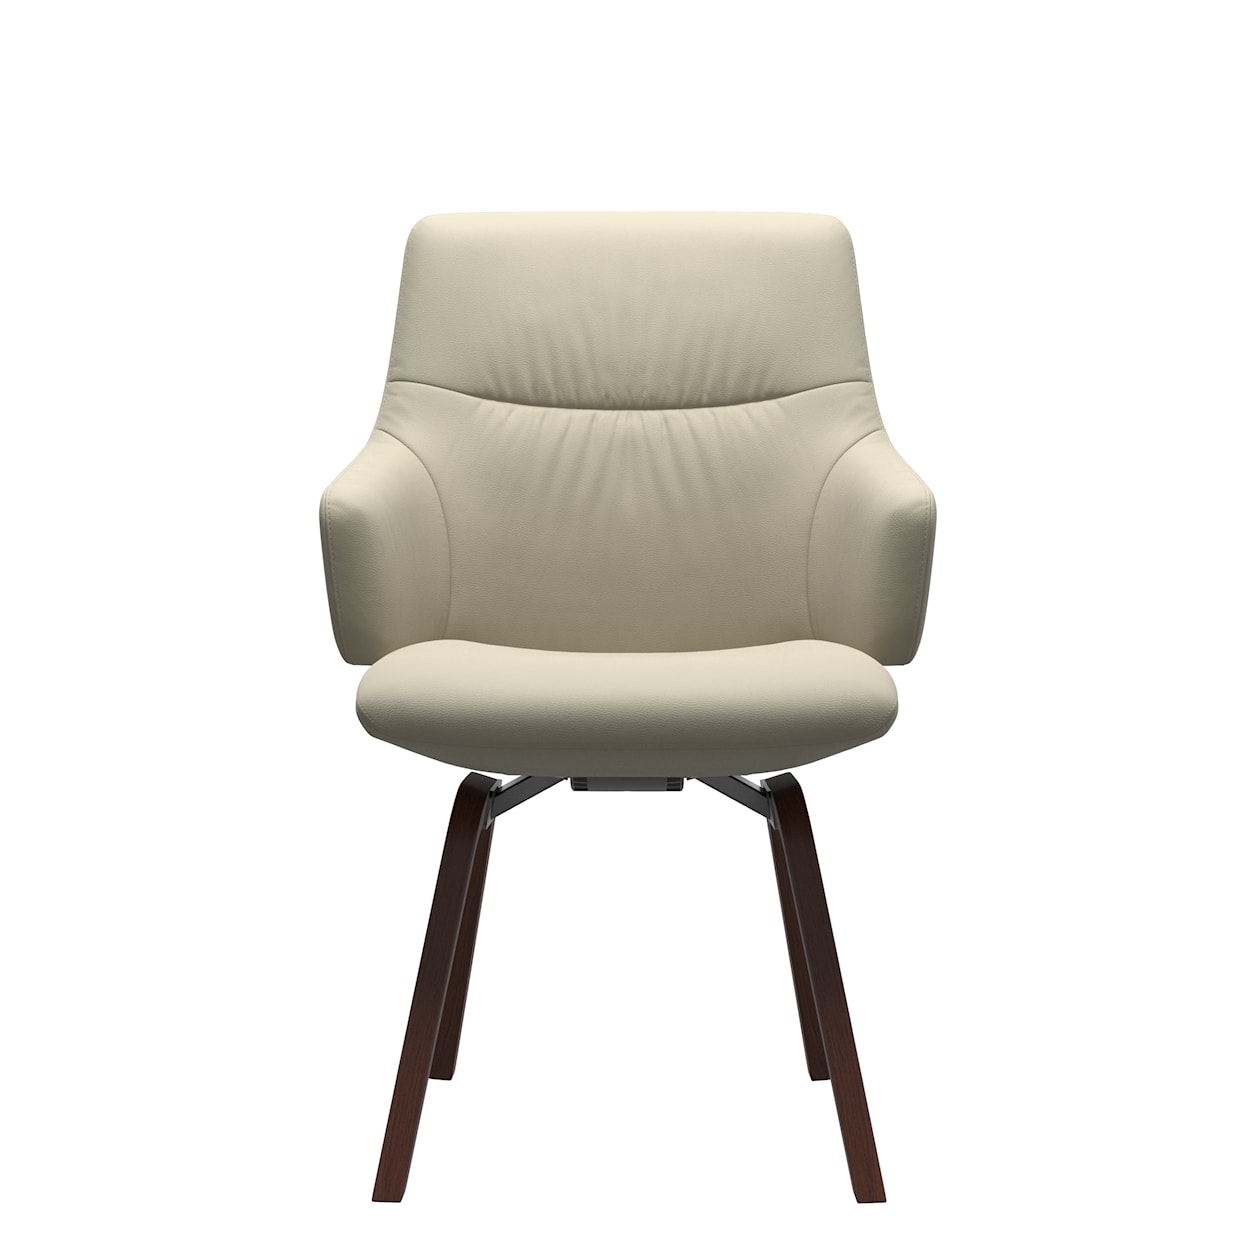 Stressless by Ekornes Stressless Mint Mint Large Low-Back Dining Chair w Arms D200